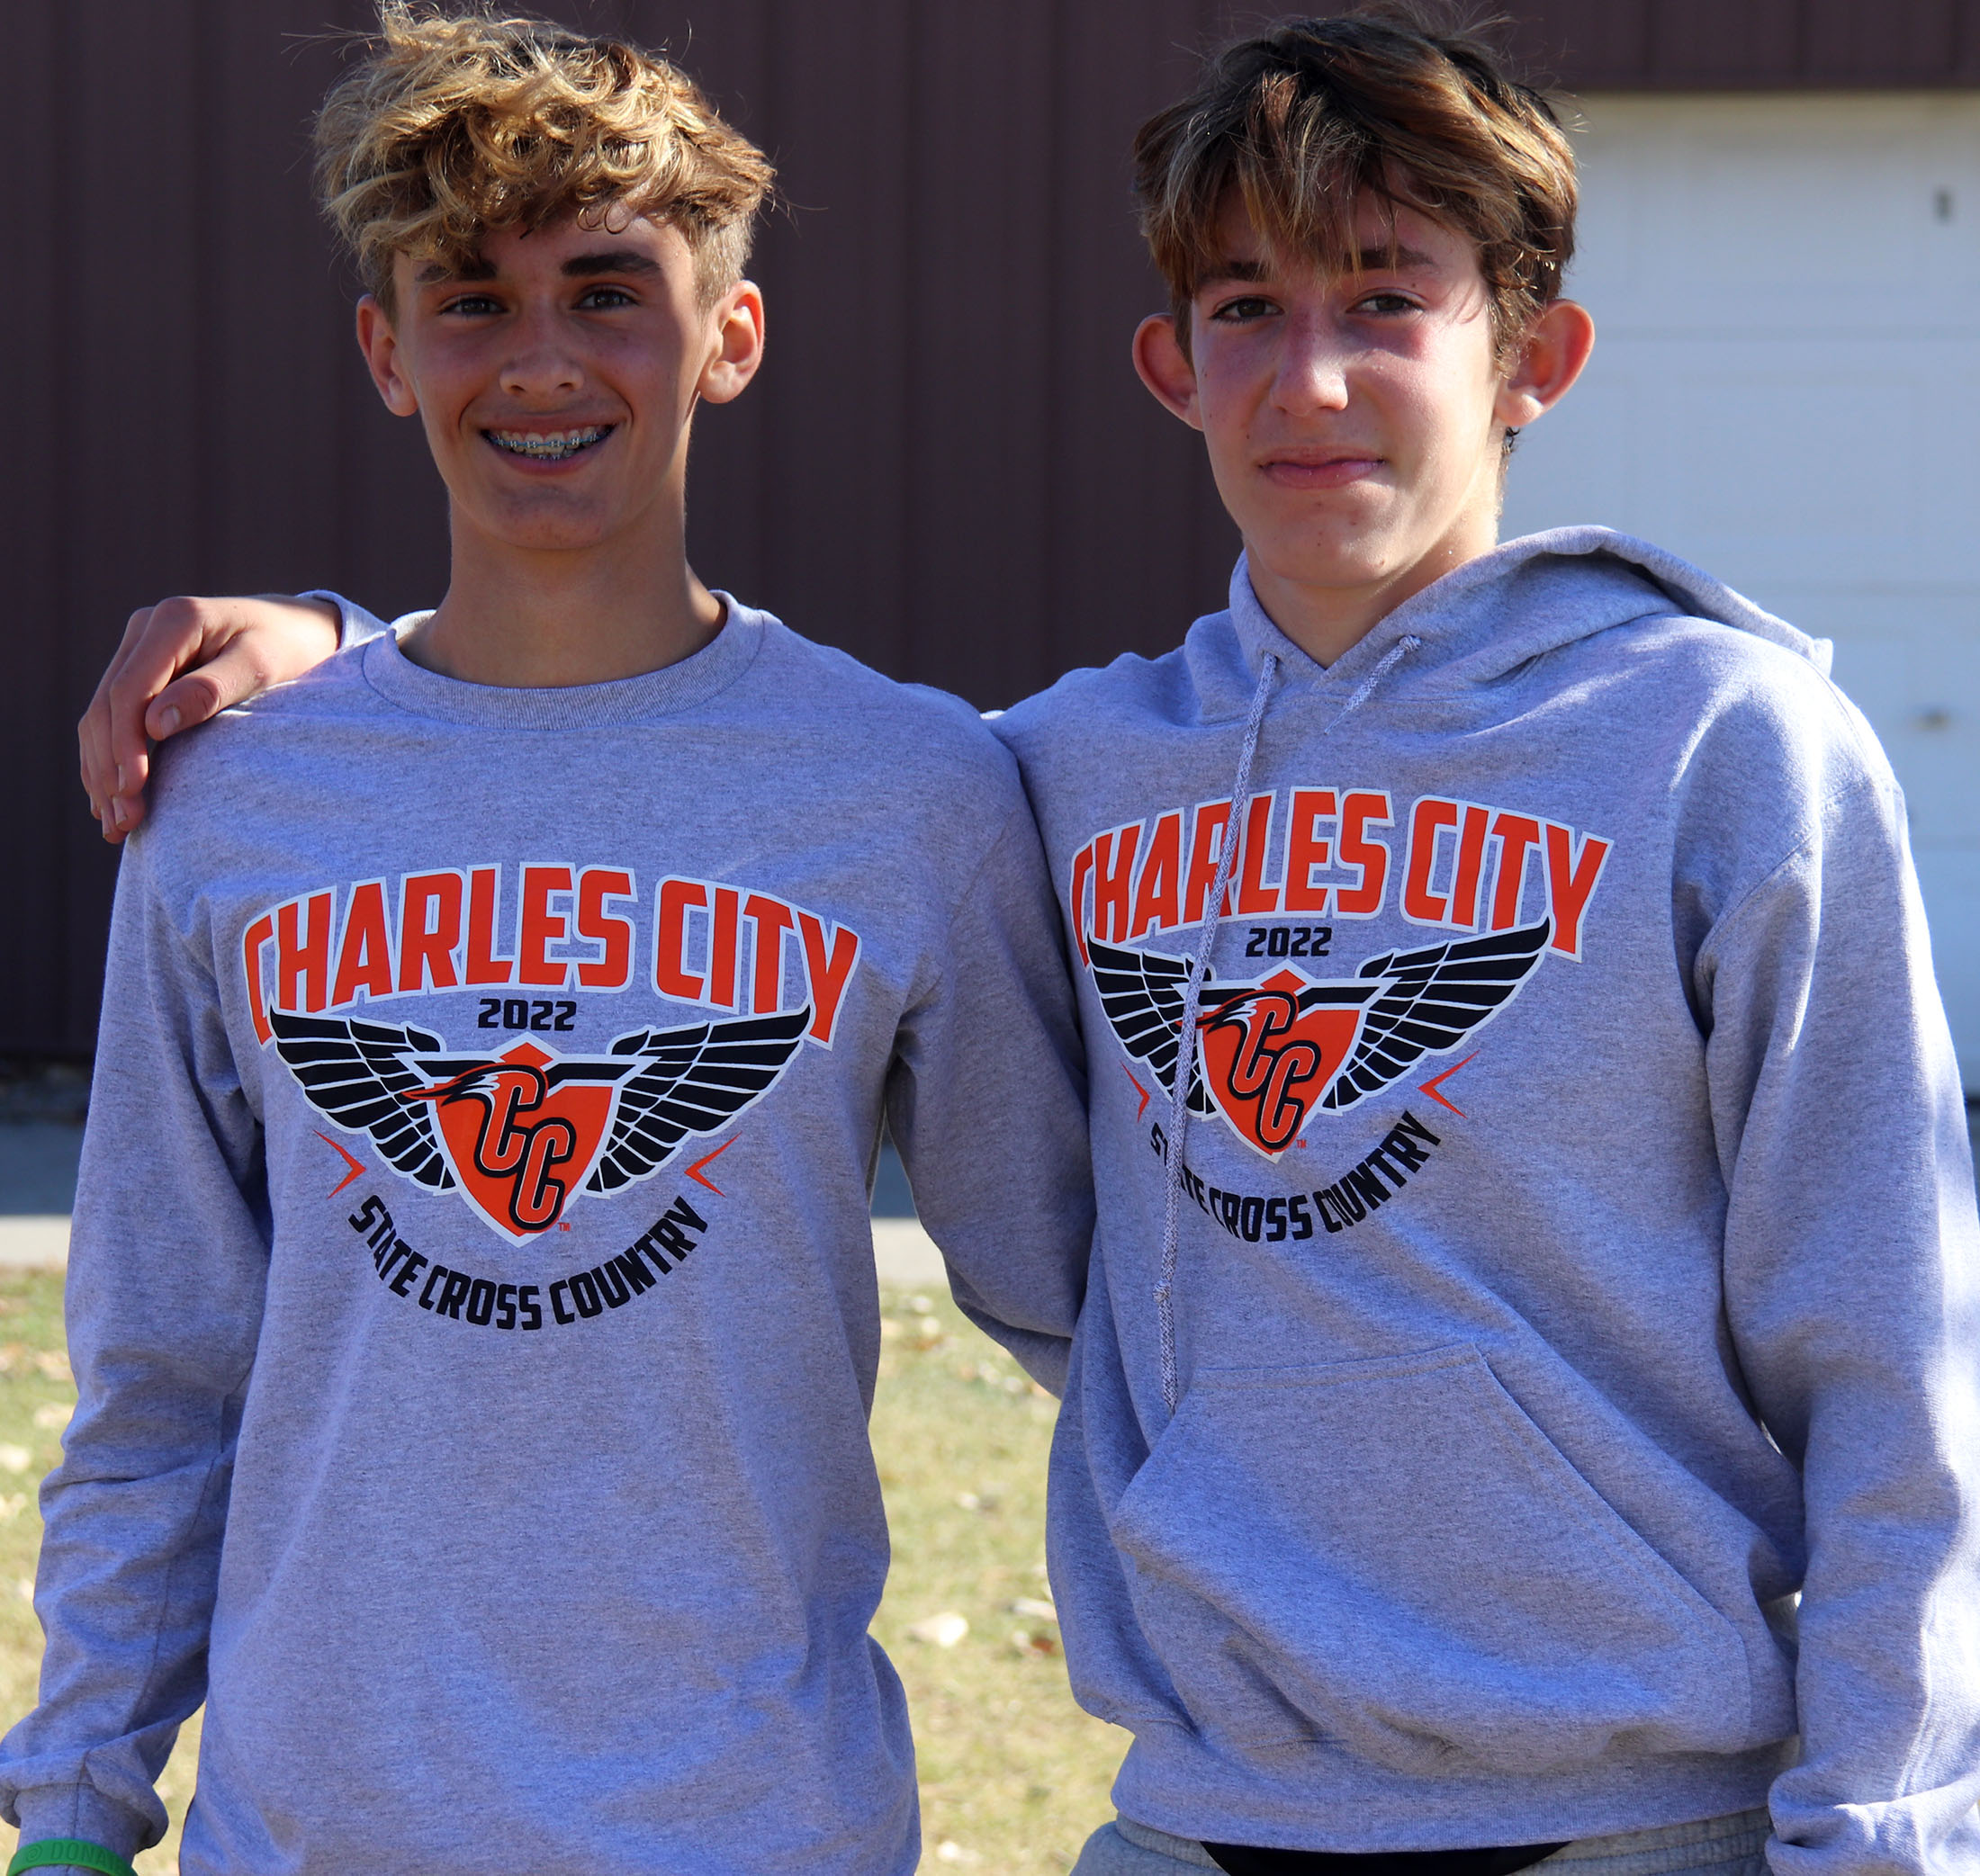 Comet sophomores Williams, Graeser move closer to the front in second XC state race